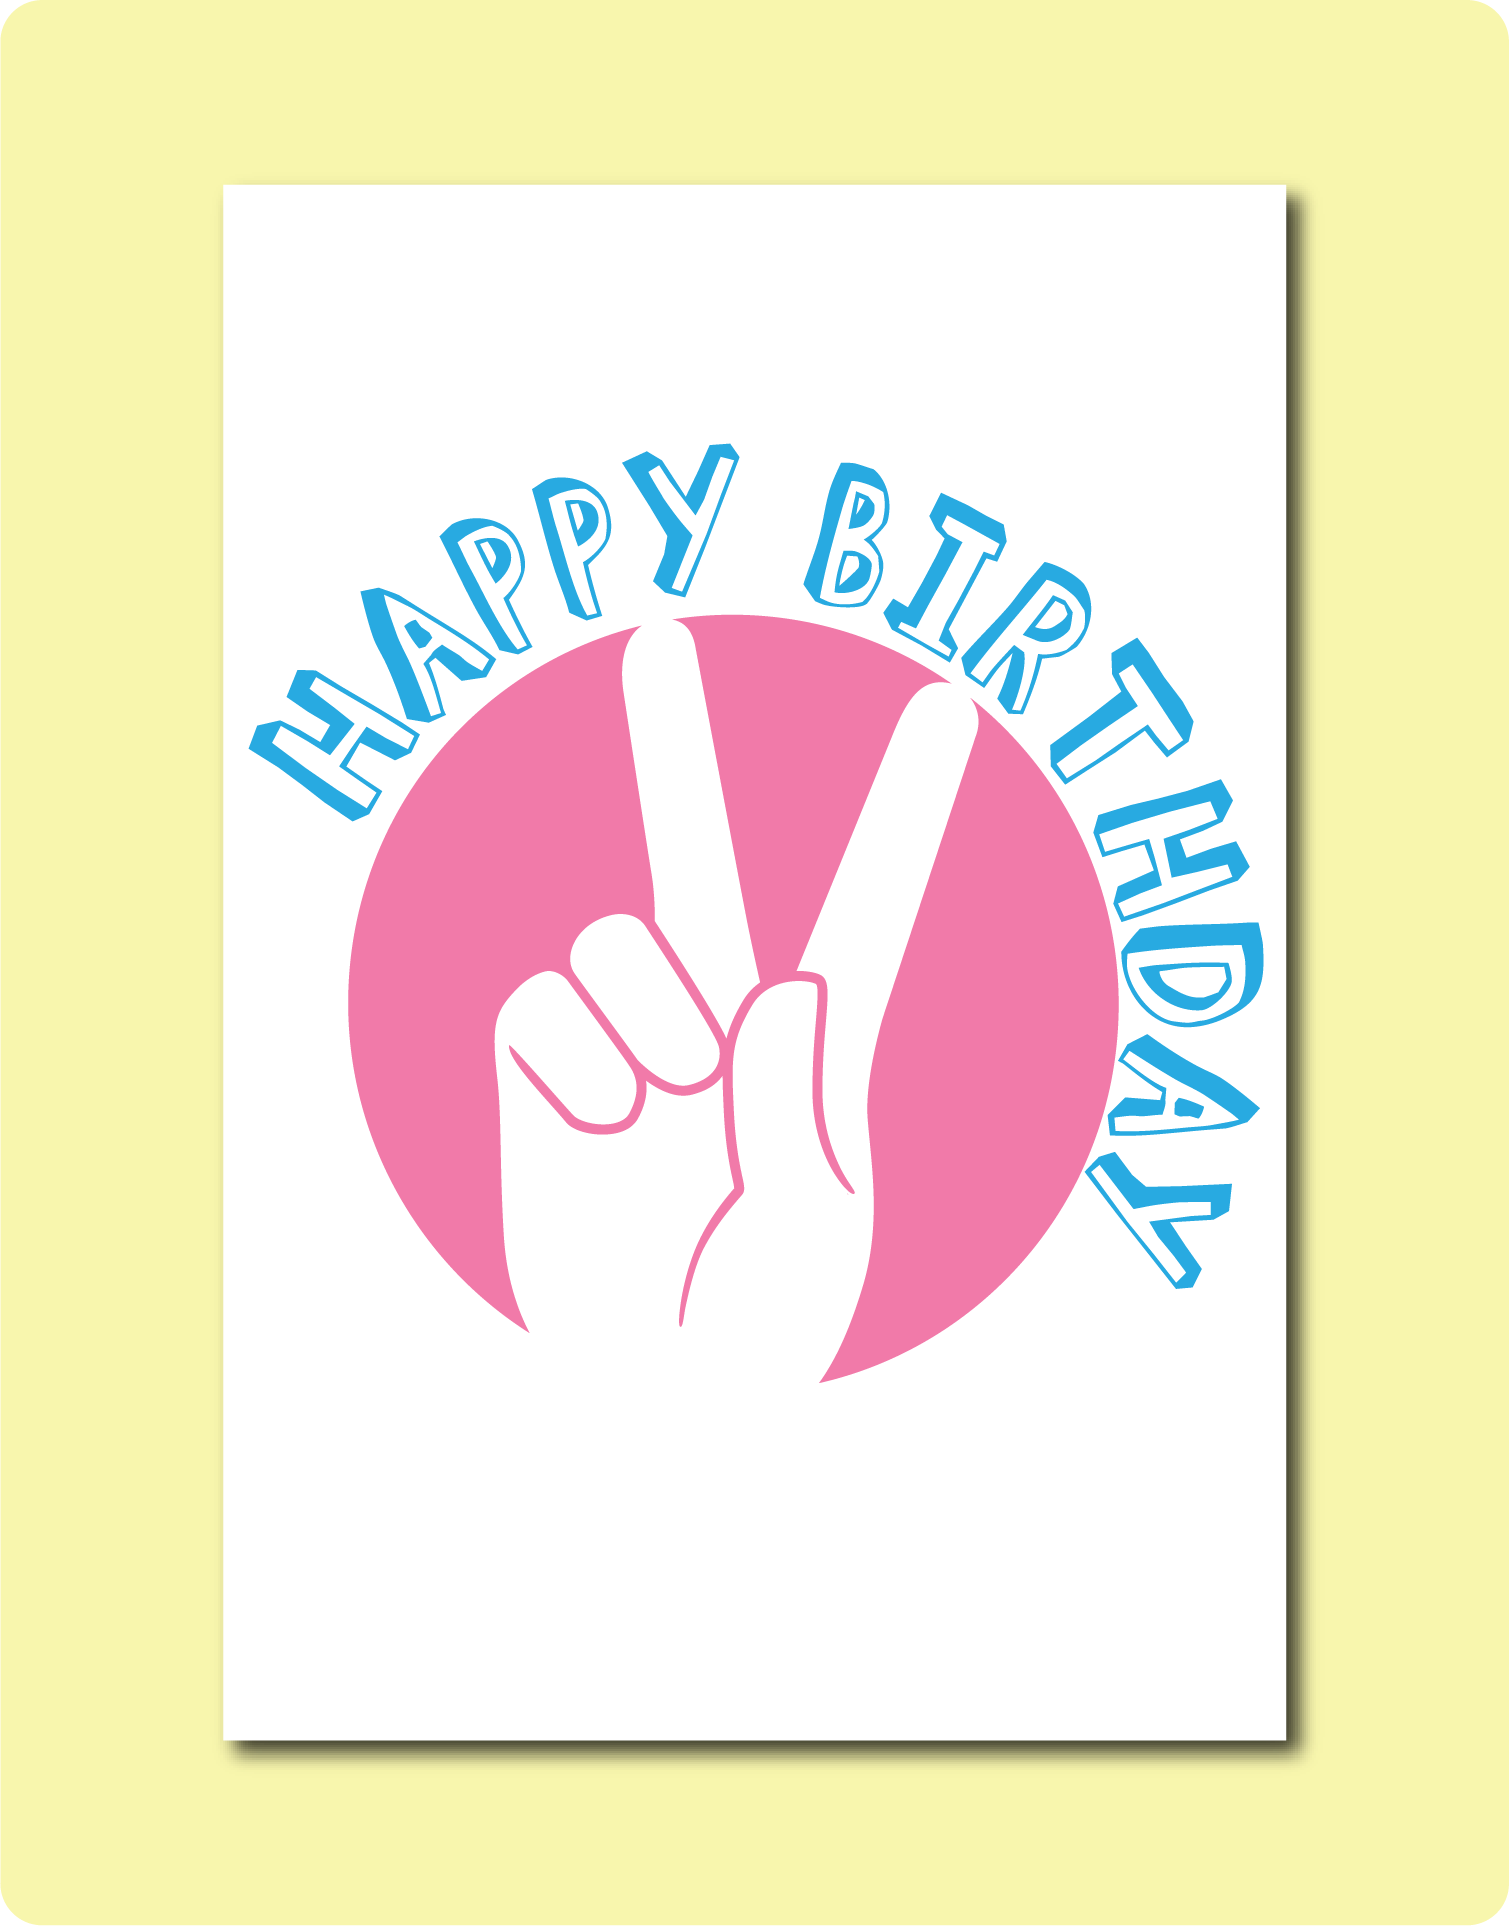 Happy Birthday Peace Sign on Pink and Blue font around pink sun Greeting Card